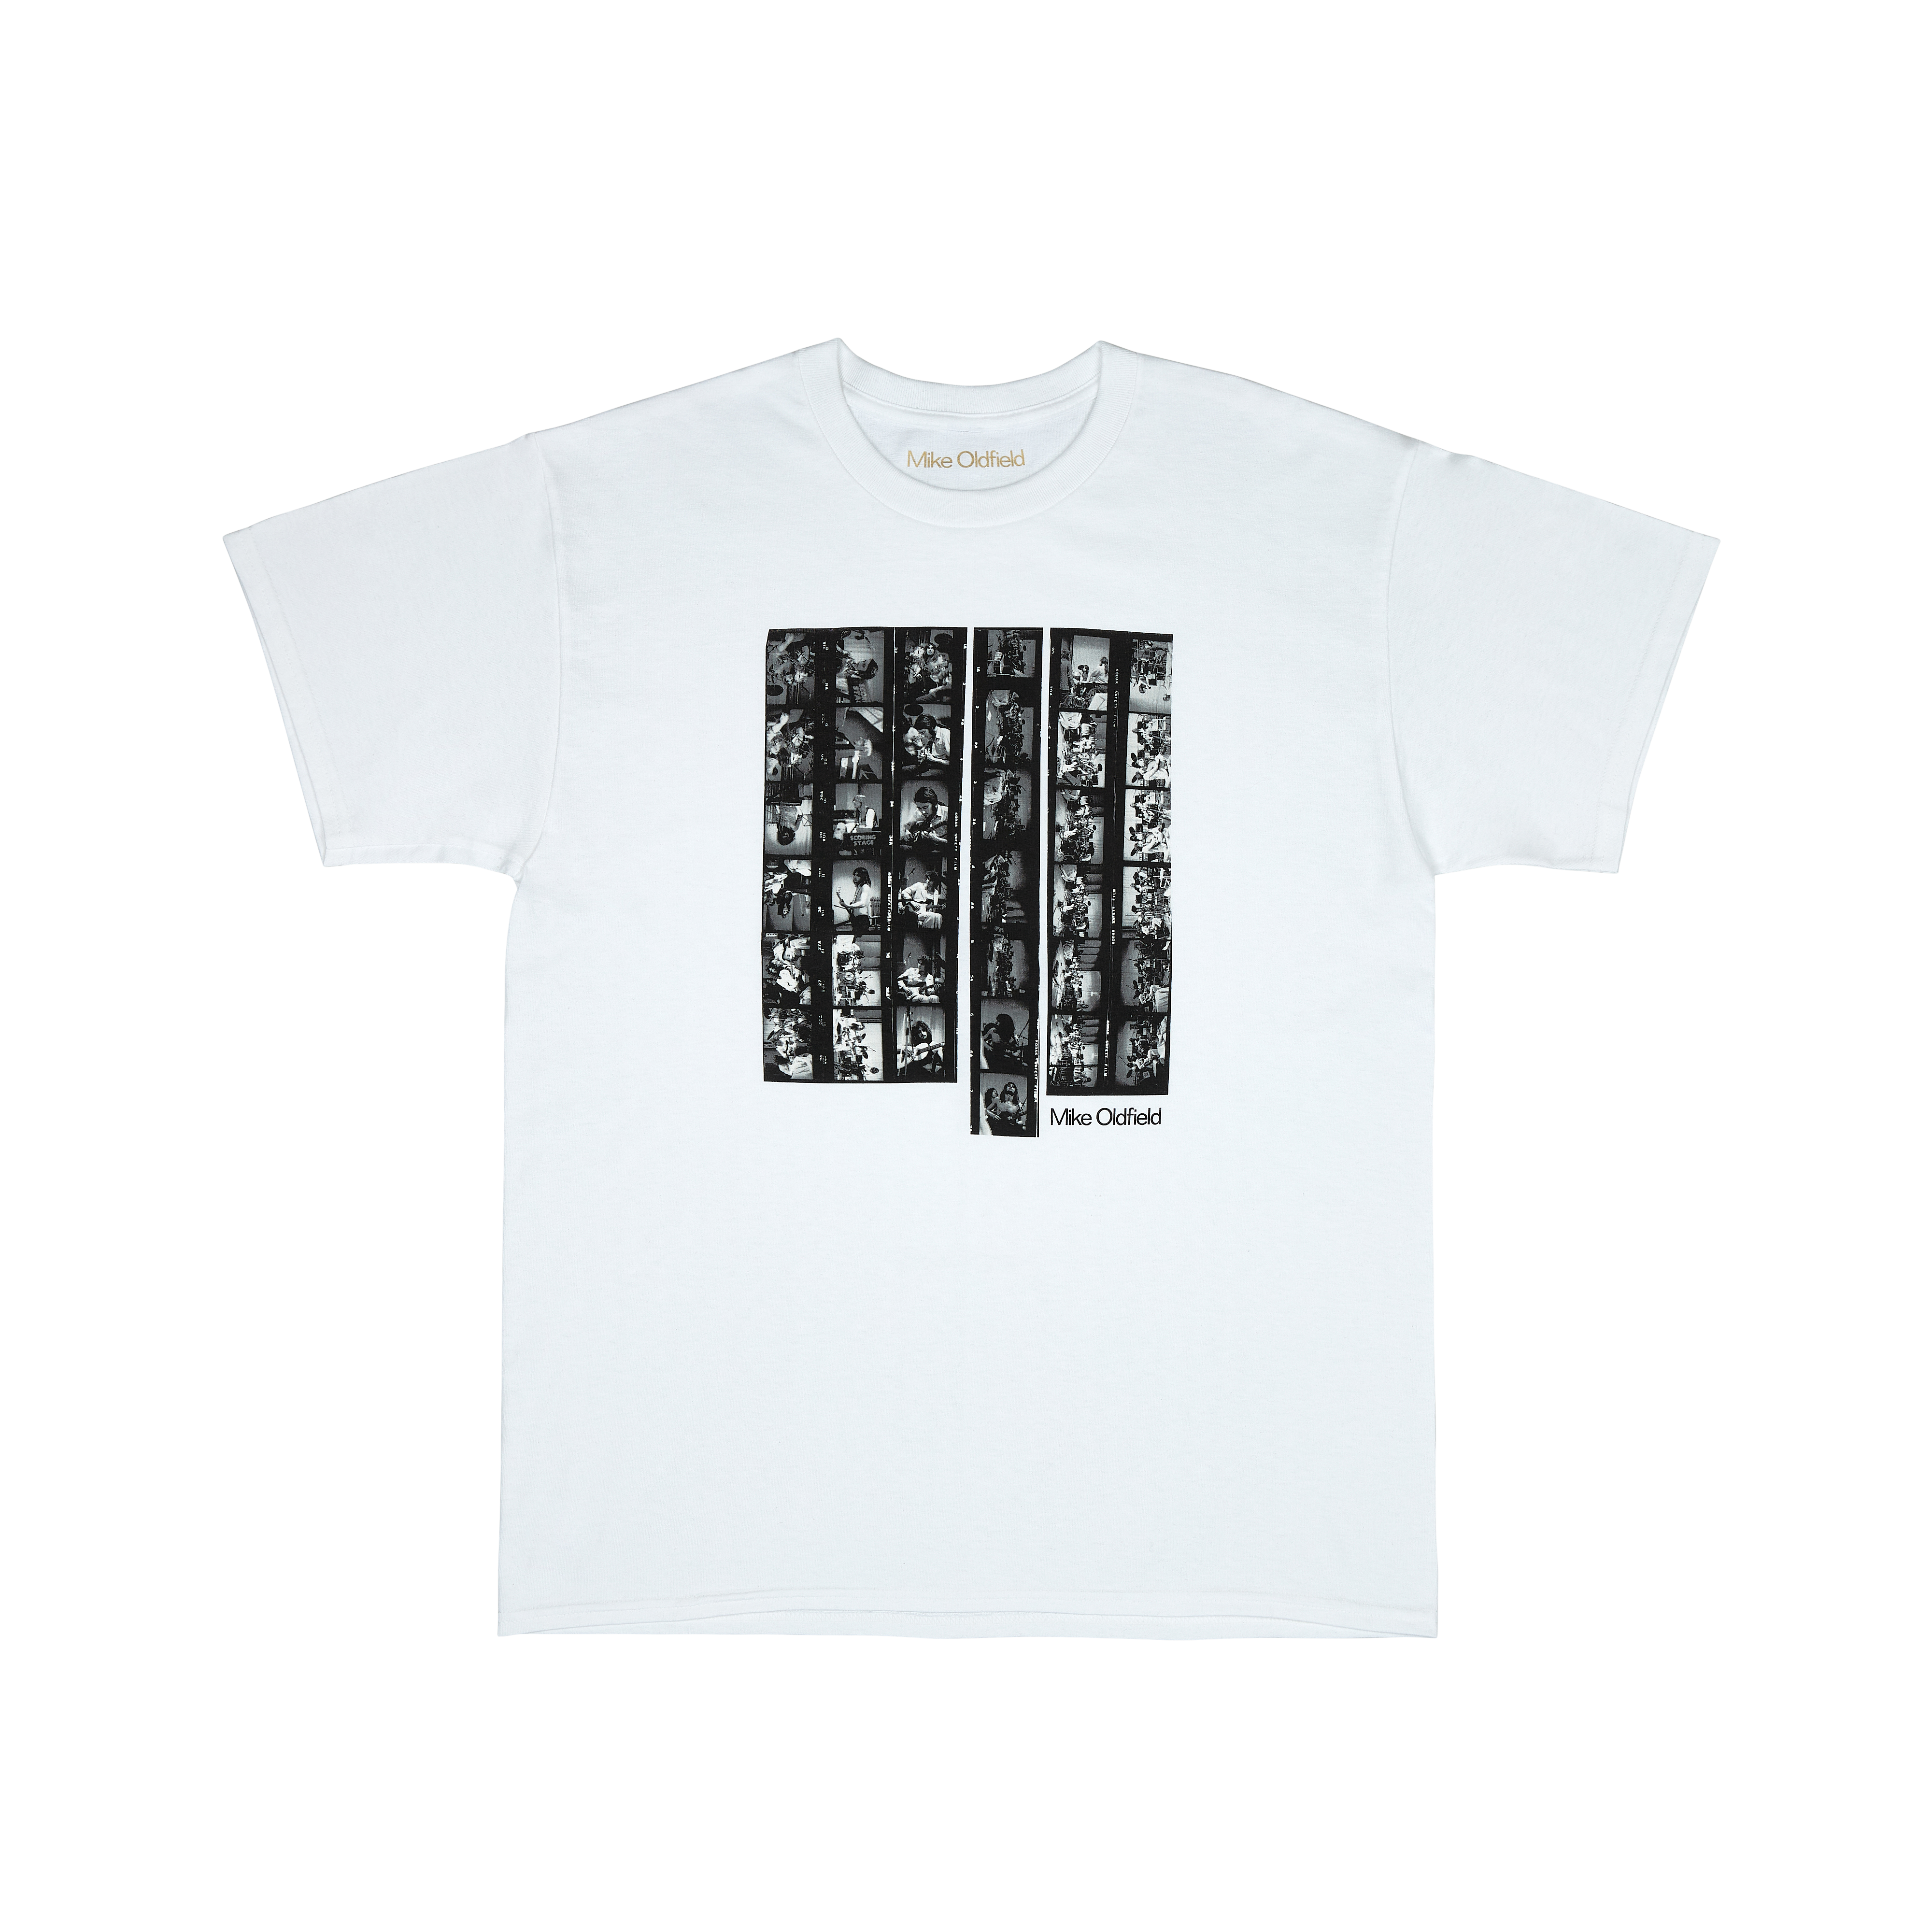 Tubular Bells: White T-Shirt + Limited Edition A2 Print (1/2)